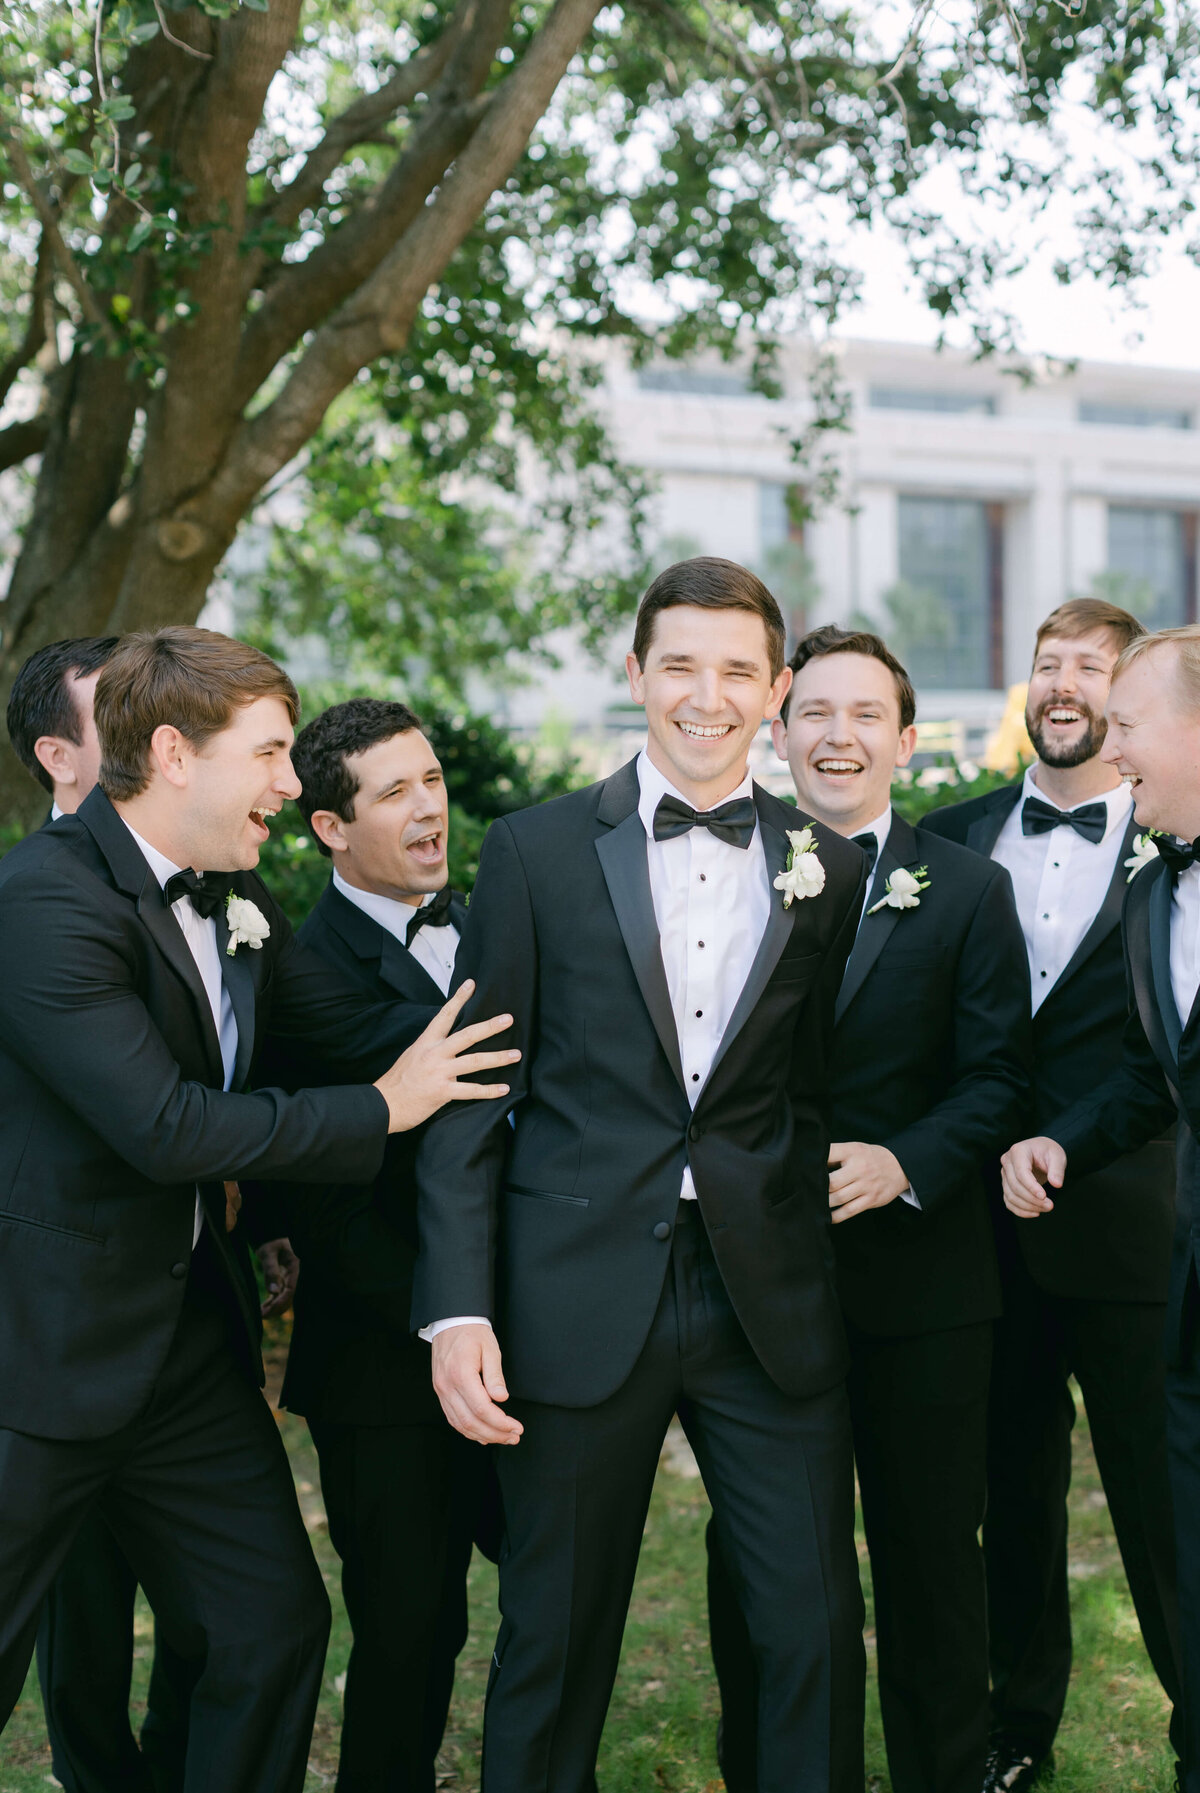 A groom laughs with his groomsmen.